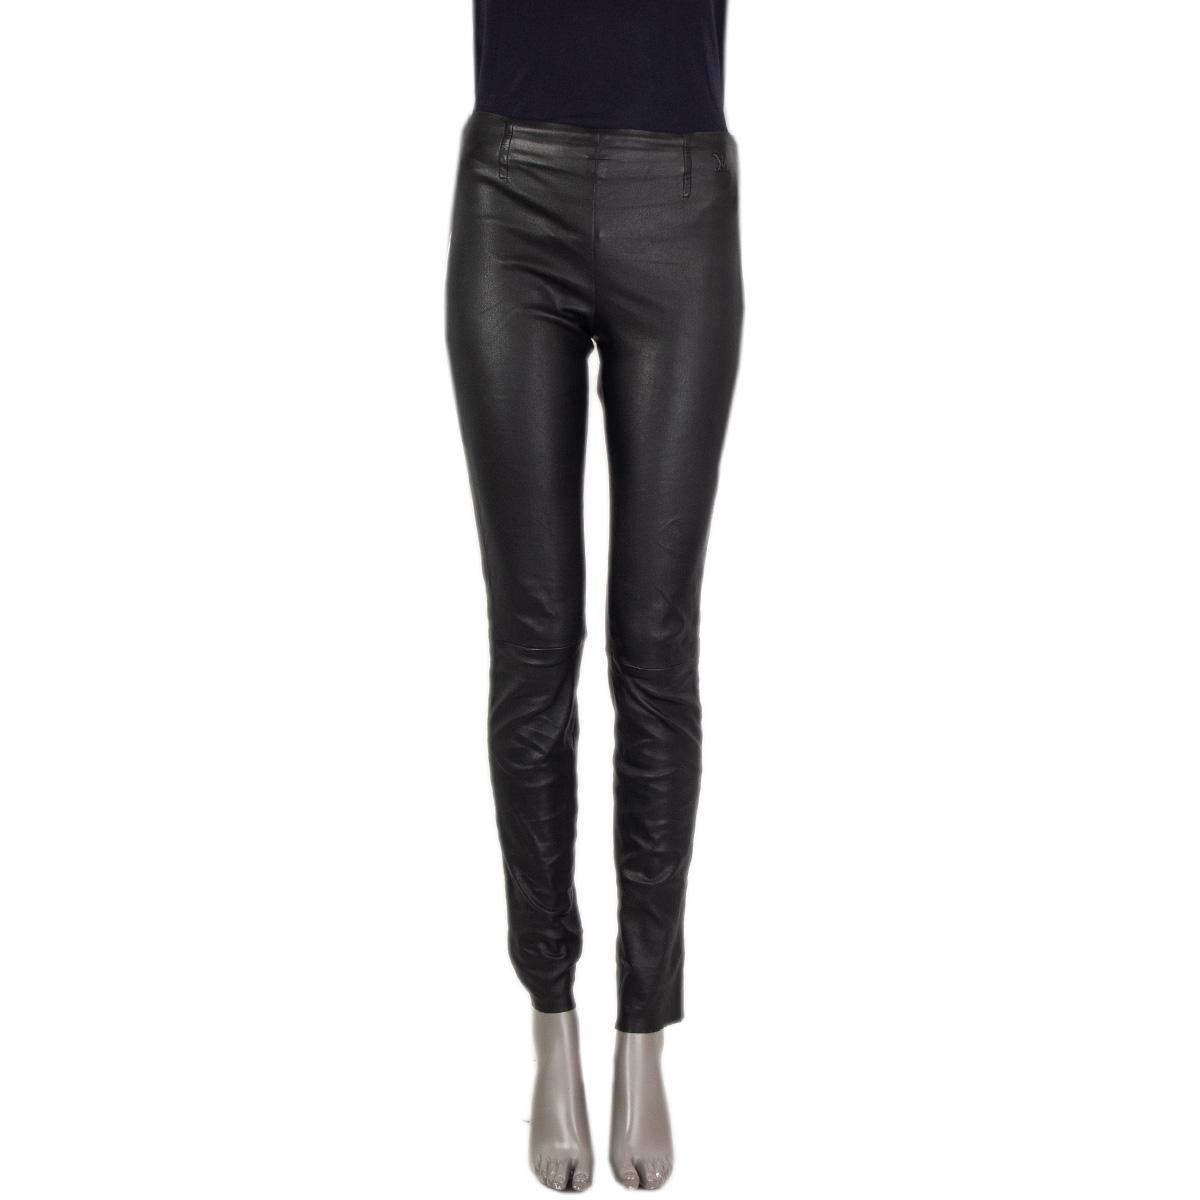 100% authentic  Louis Vuitton skinny leather pants in black lambskin (100%) with an embossed logo at the upper left side. Slip-in fit with an elastic band at the back waist-line. Unlined. Has been worn and is in excellent condition. 

Tag